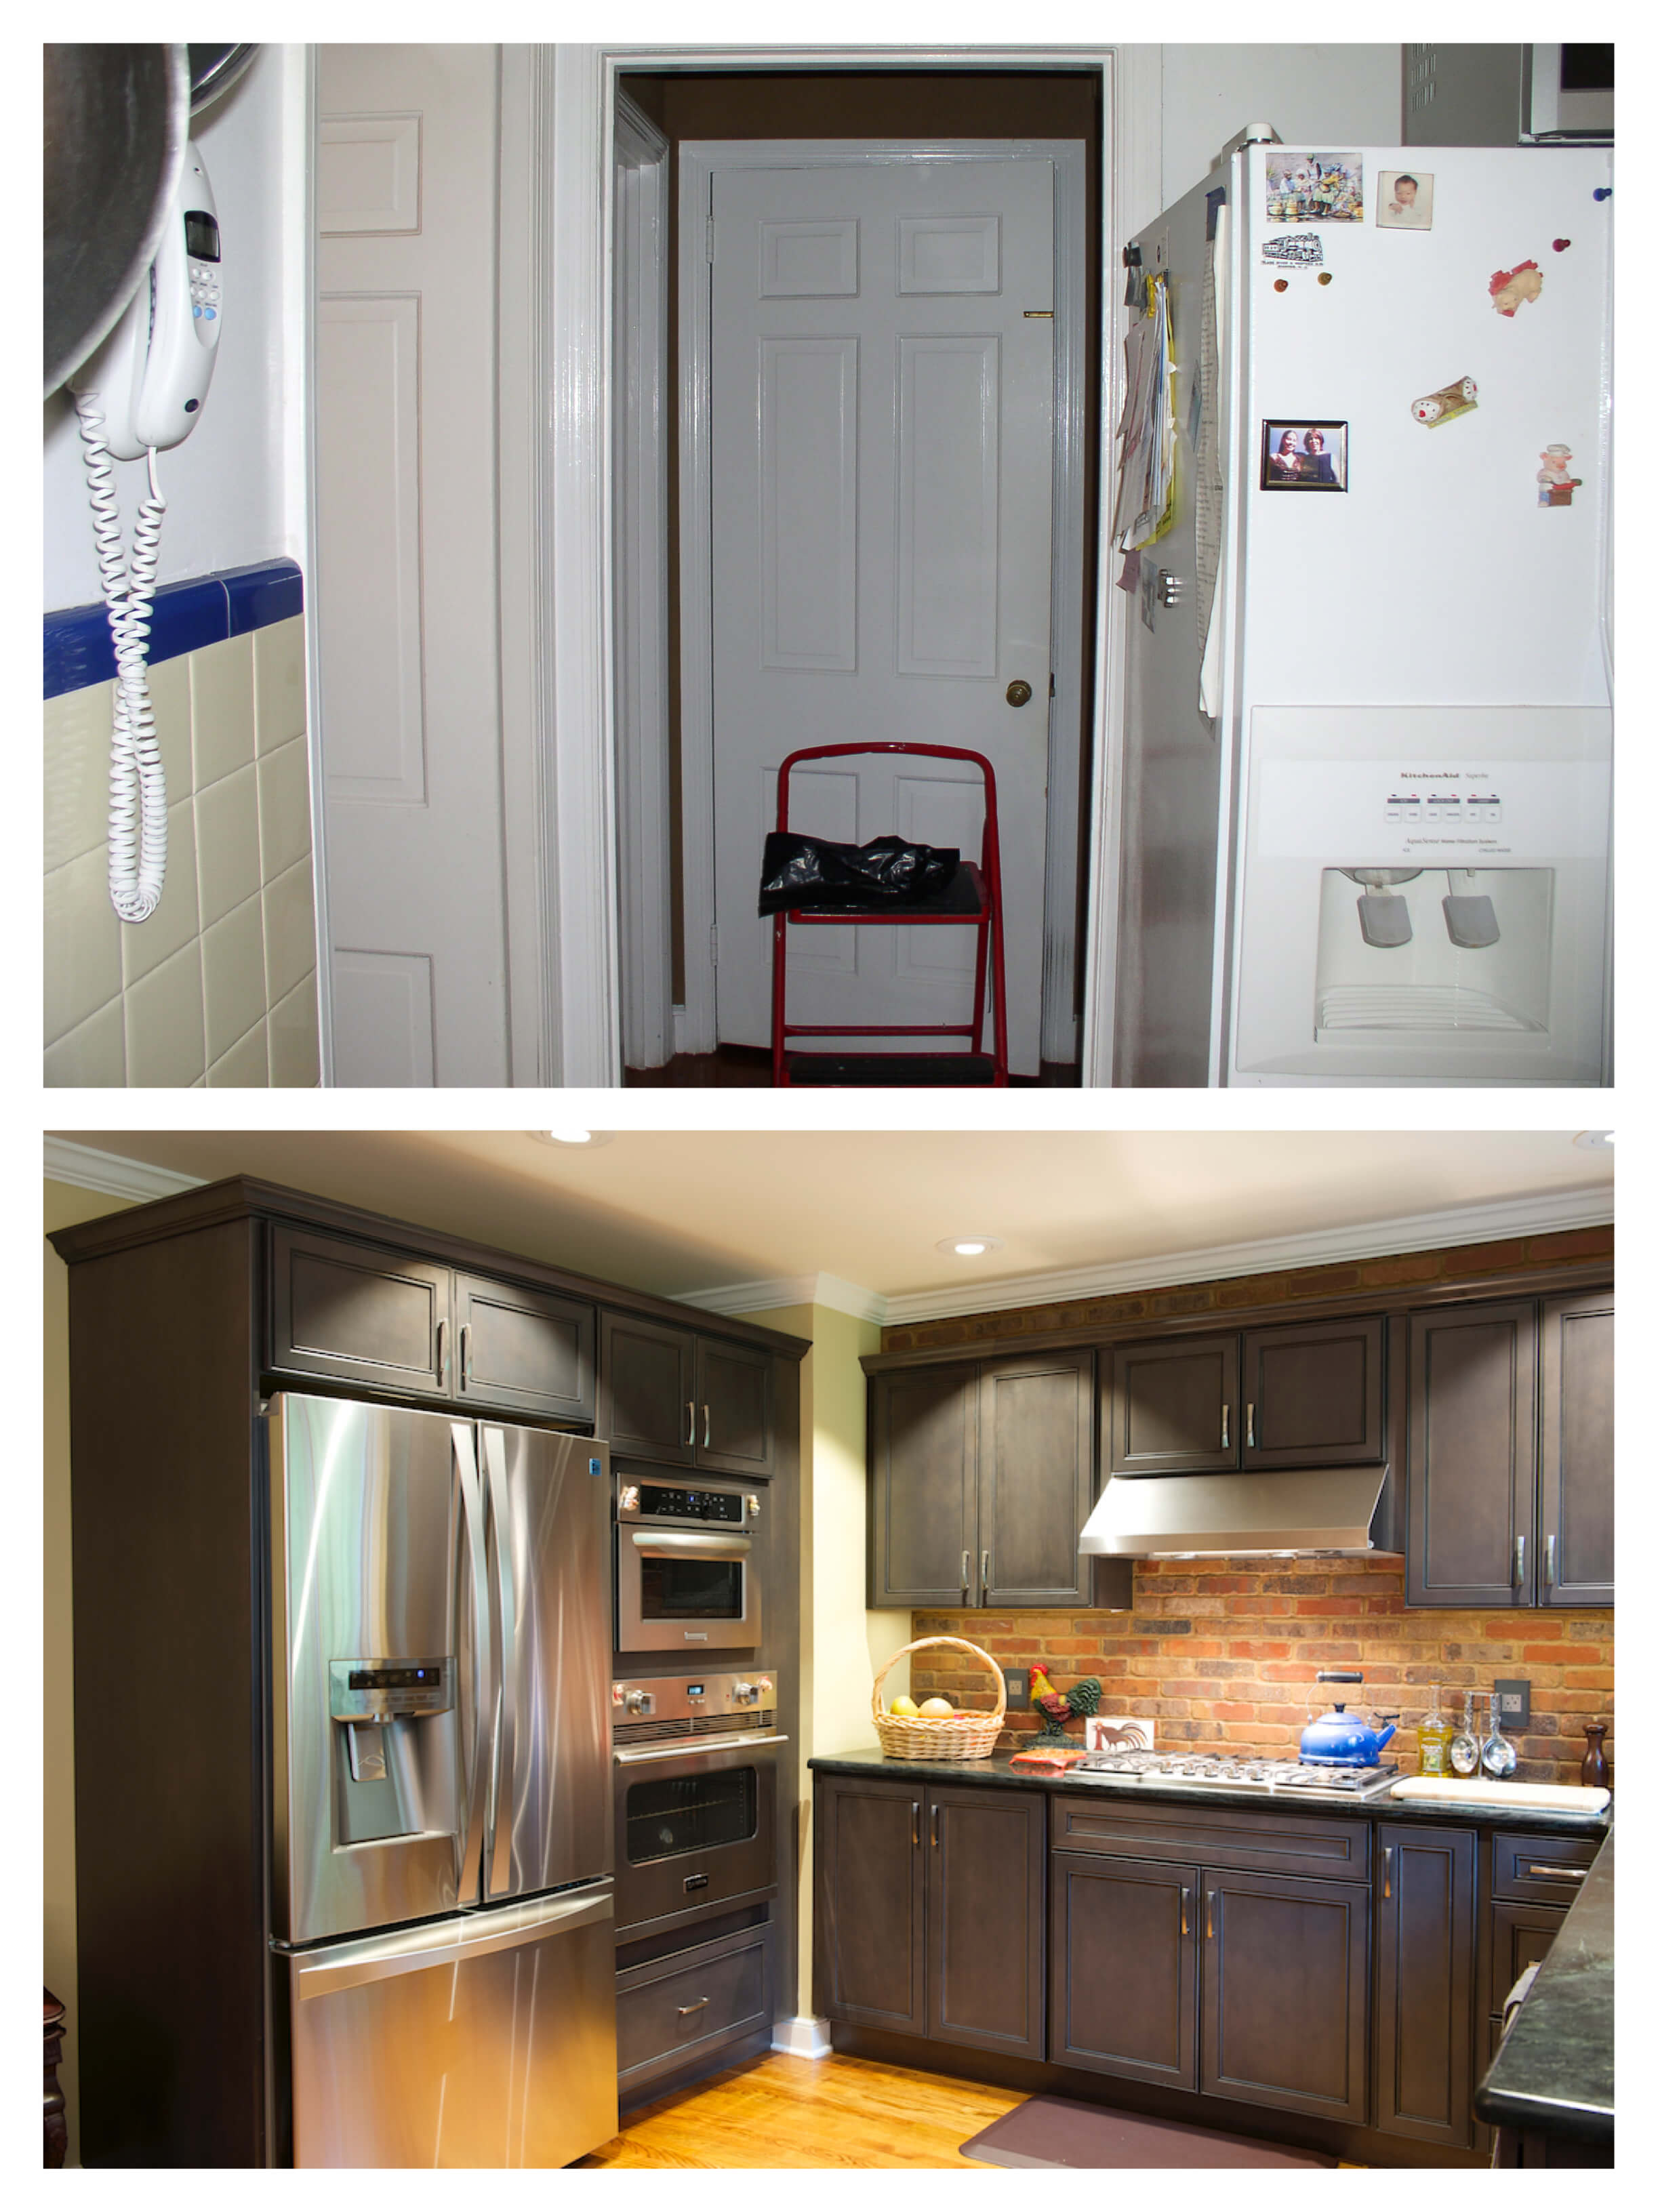 Summit Kitchen Remodeling With Decora Cabinets And Dorado